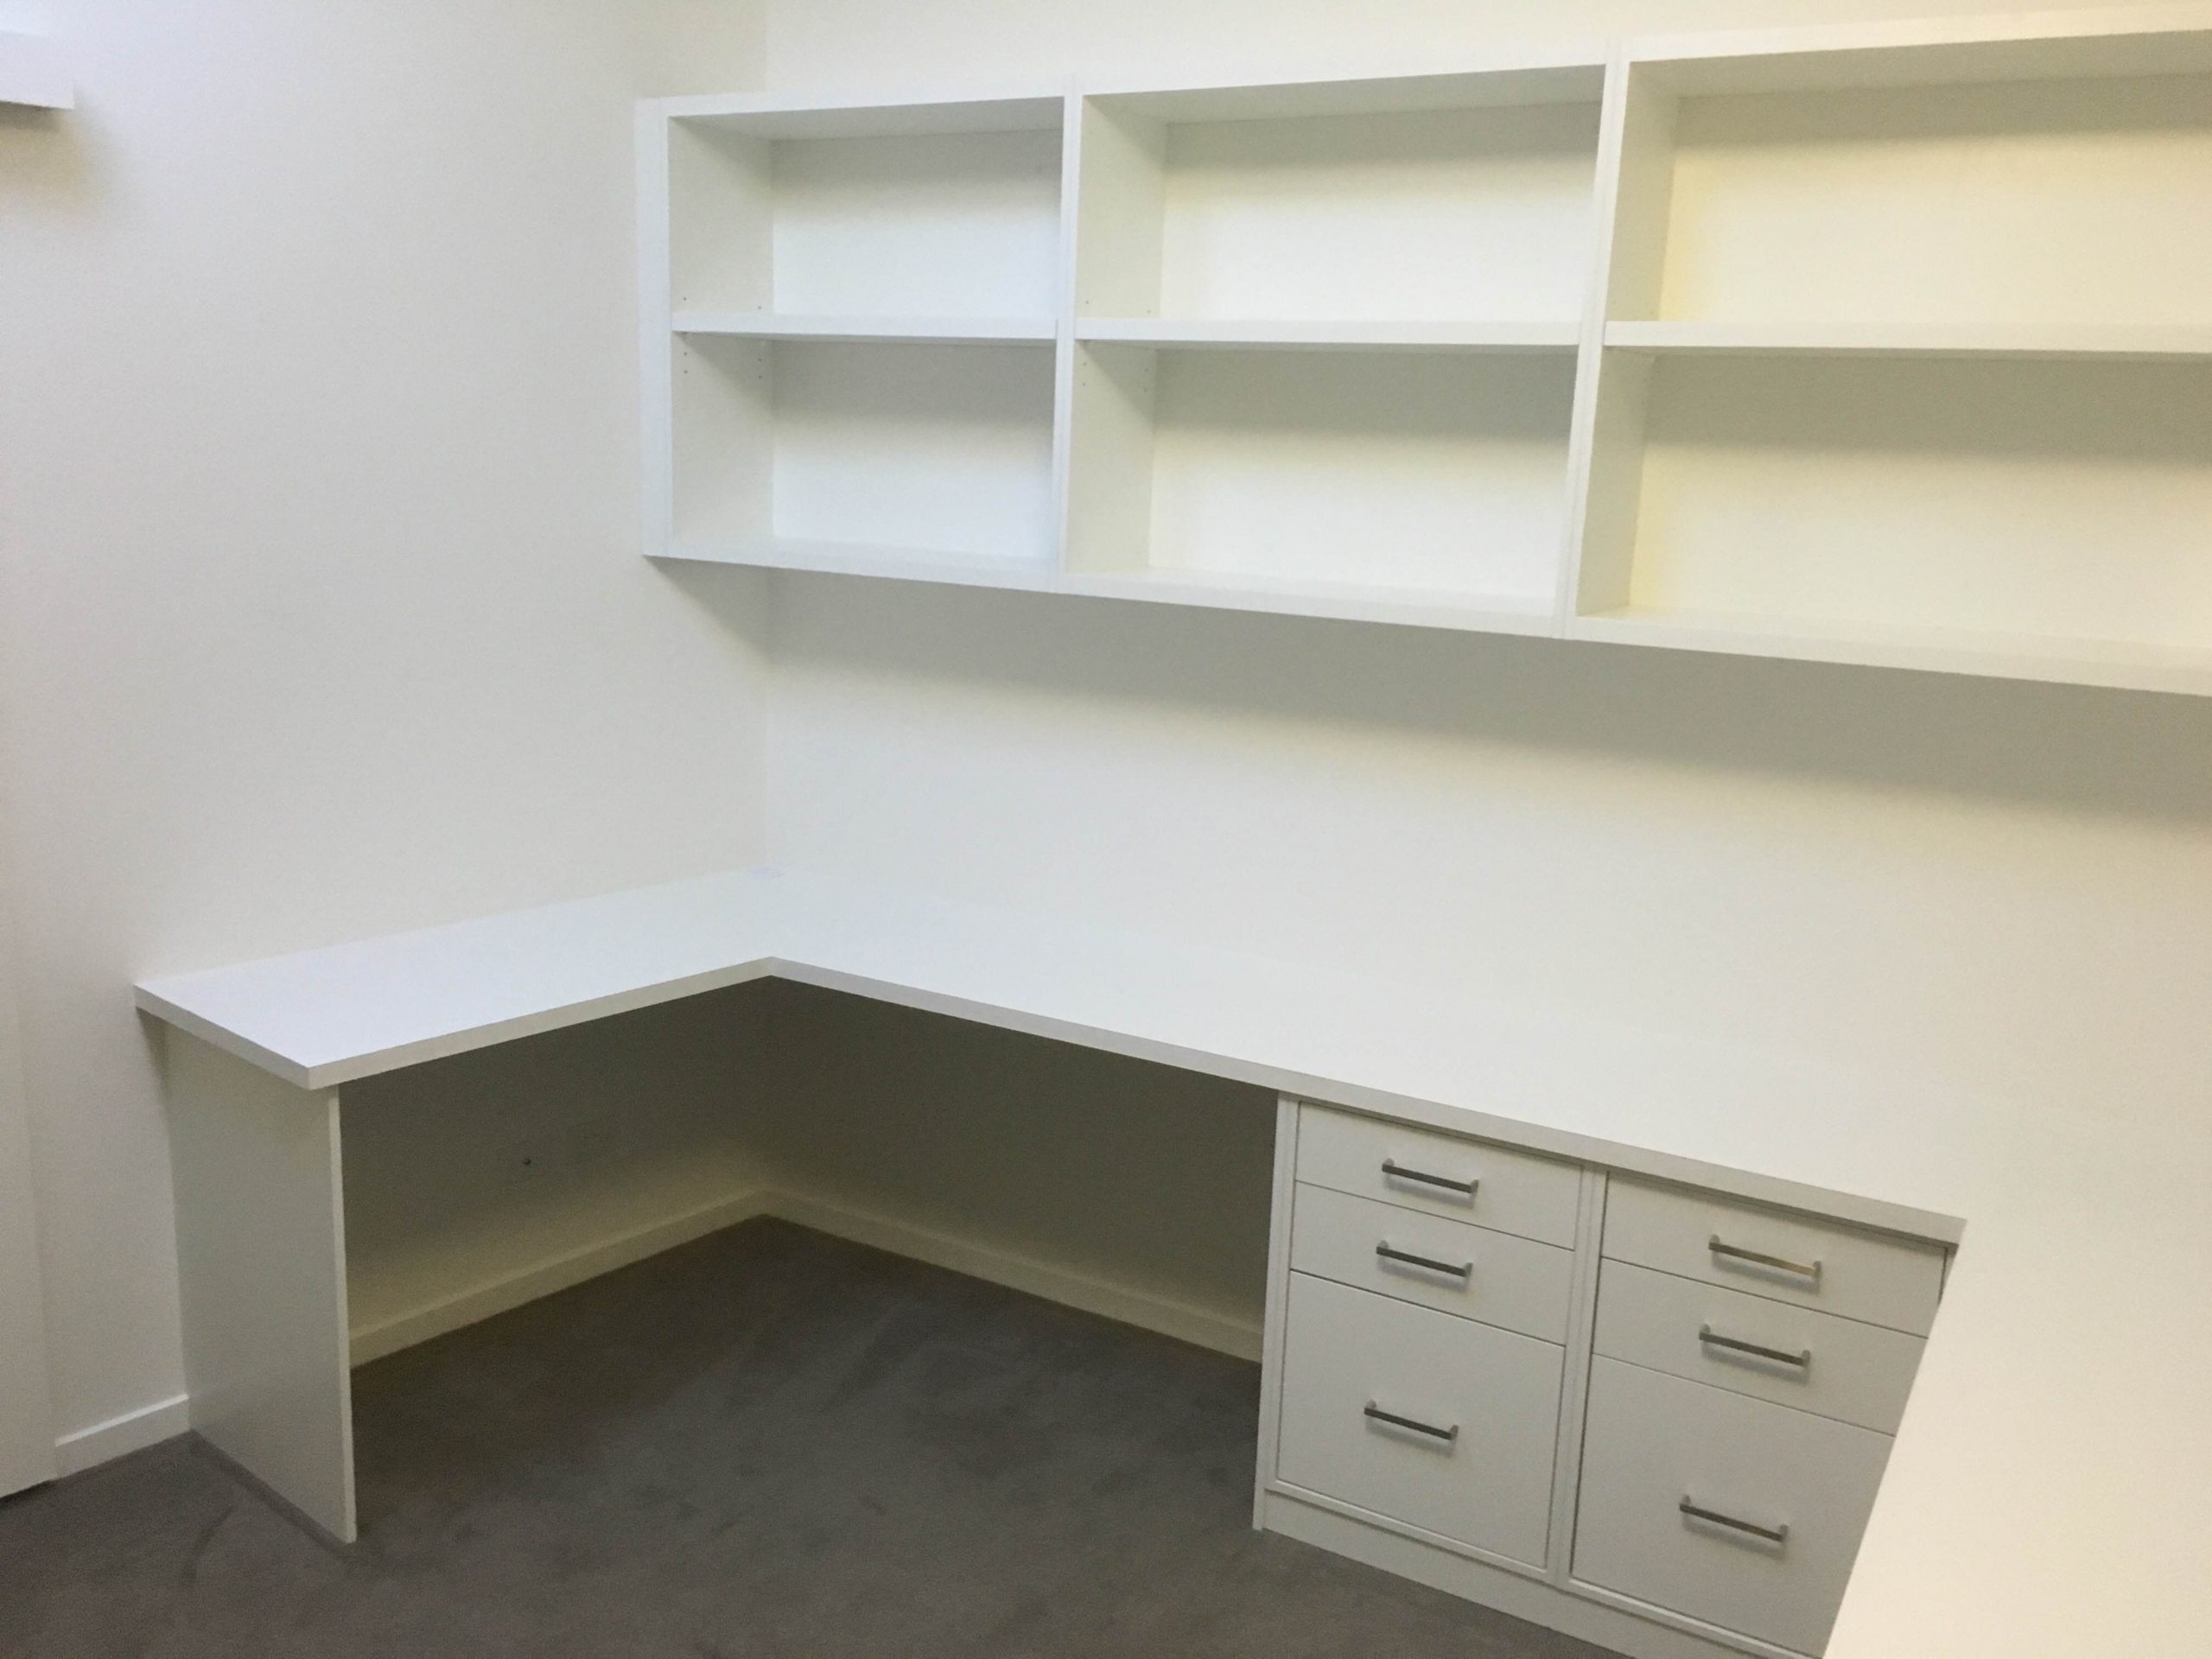 study area with desk, drawers and shelves